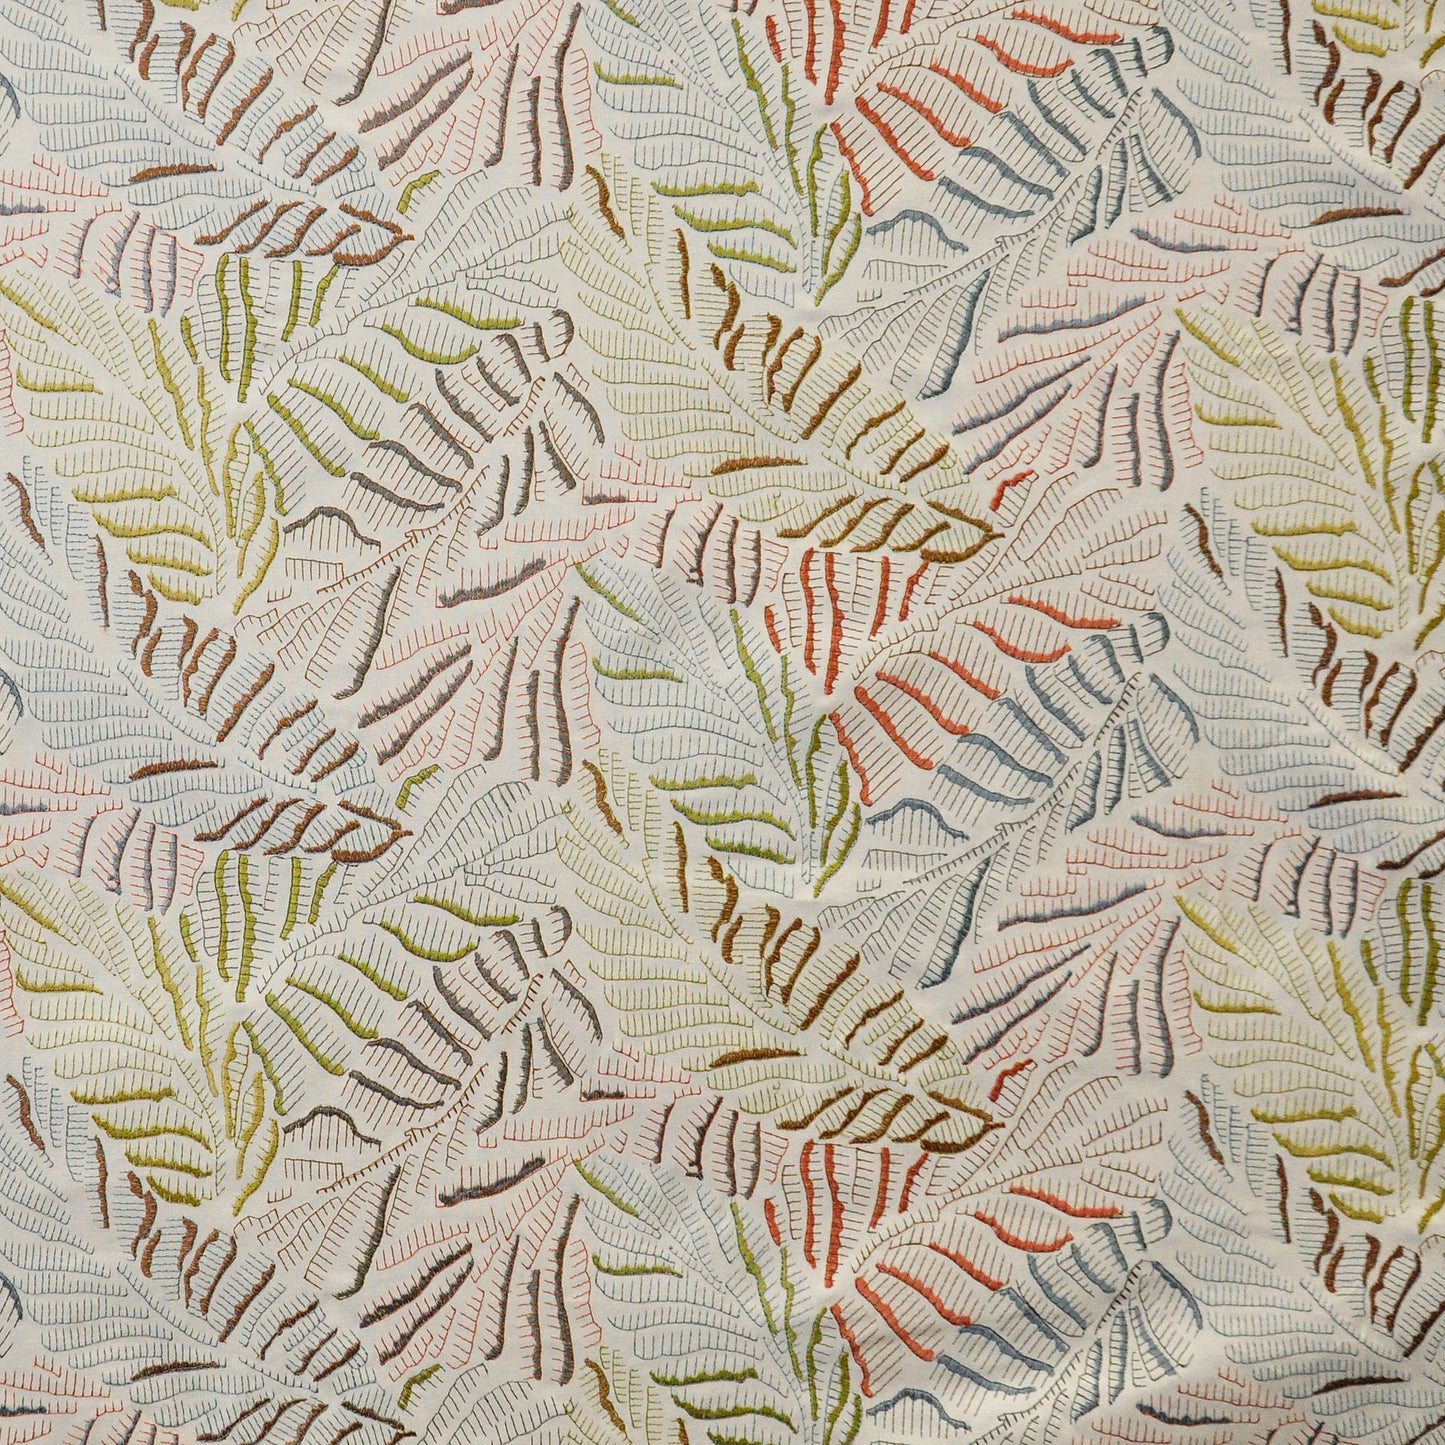 Purchase Maxwell Fabric - Hazelden, # 701 Coral Reef